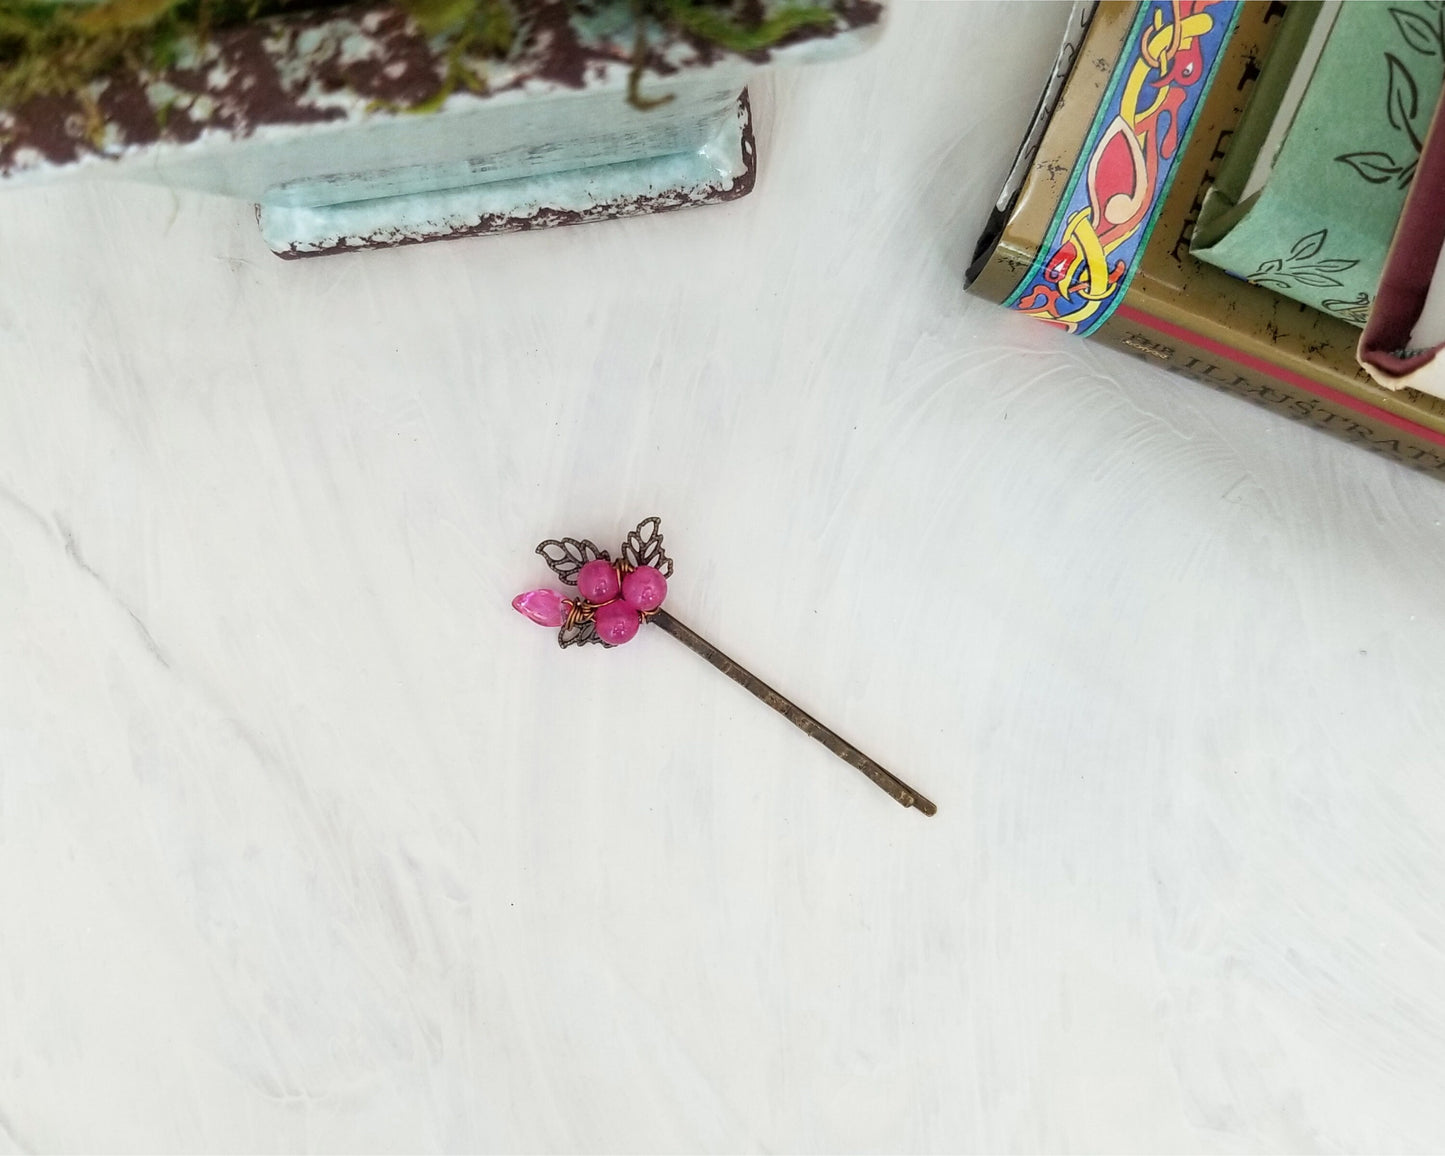 Wire Wrapped Beaded Bobby Pin / Hair Pin in Pink, Bridesmaid, Wedding, Floral, Garden, Party, Boho, Bohemian, Choice of Colors and Metals